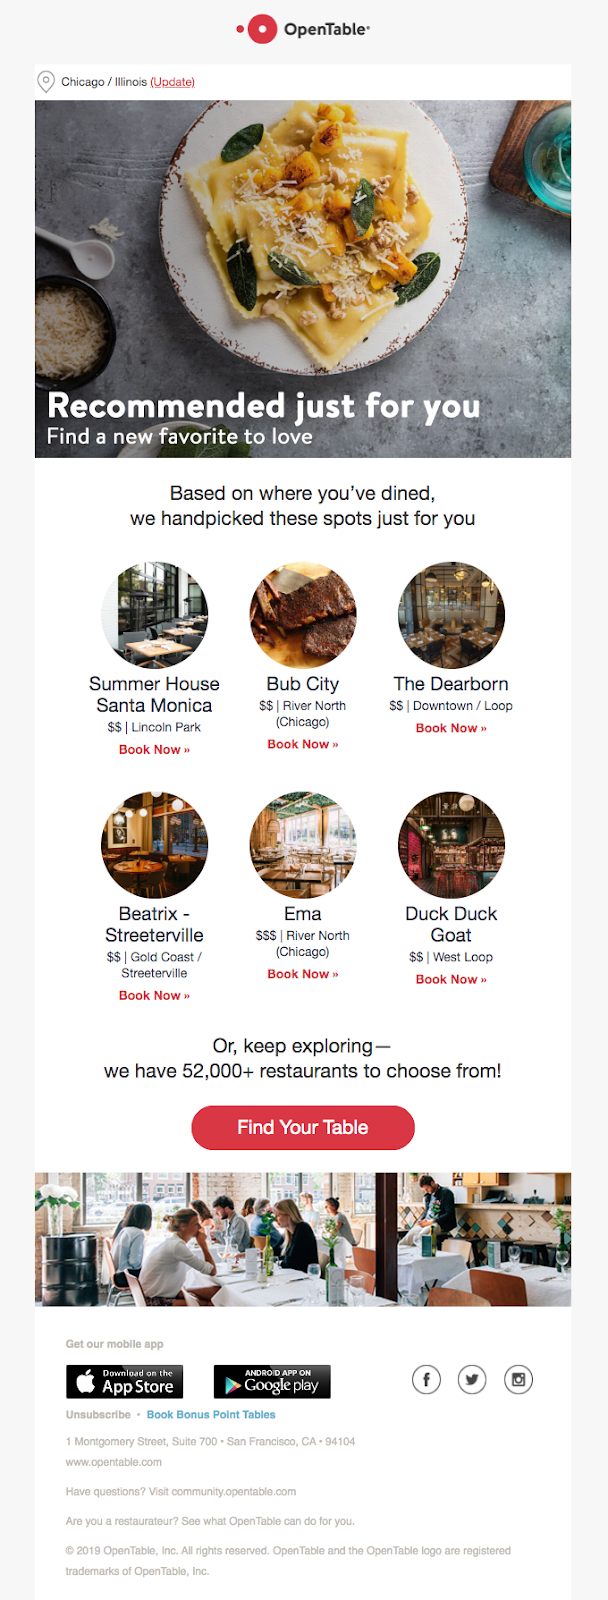 personalized marketing examples, OpenTable email